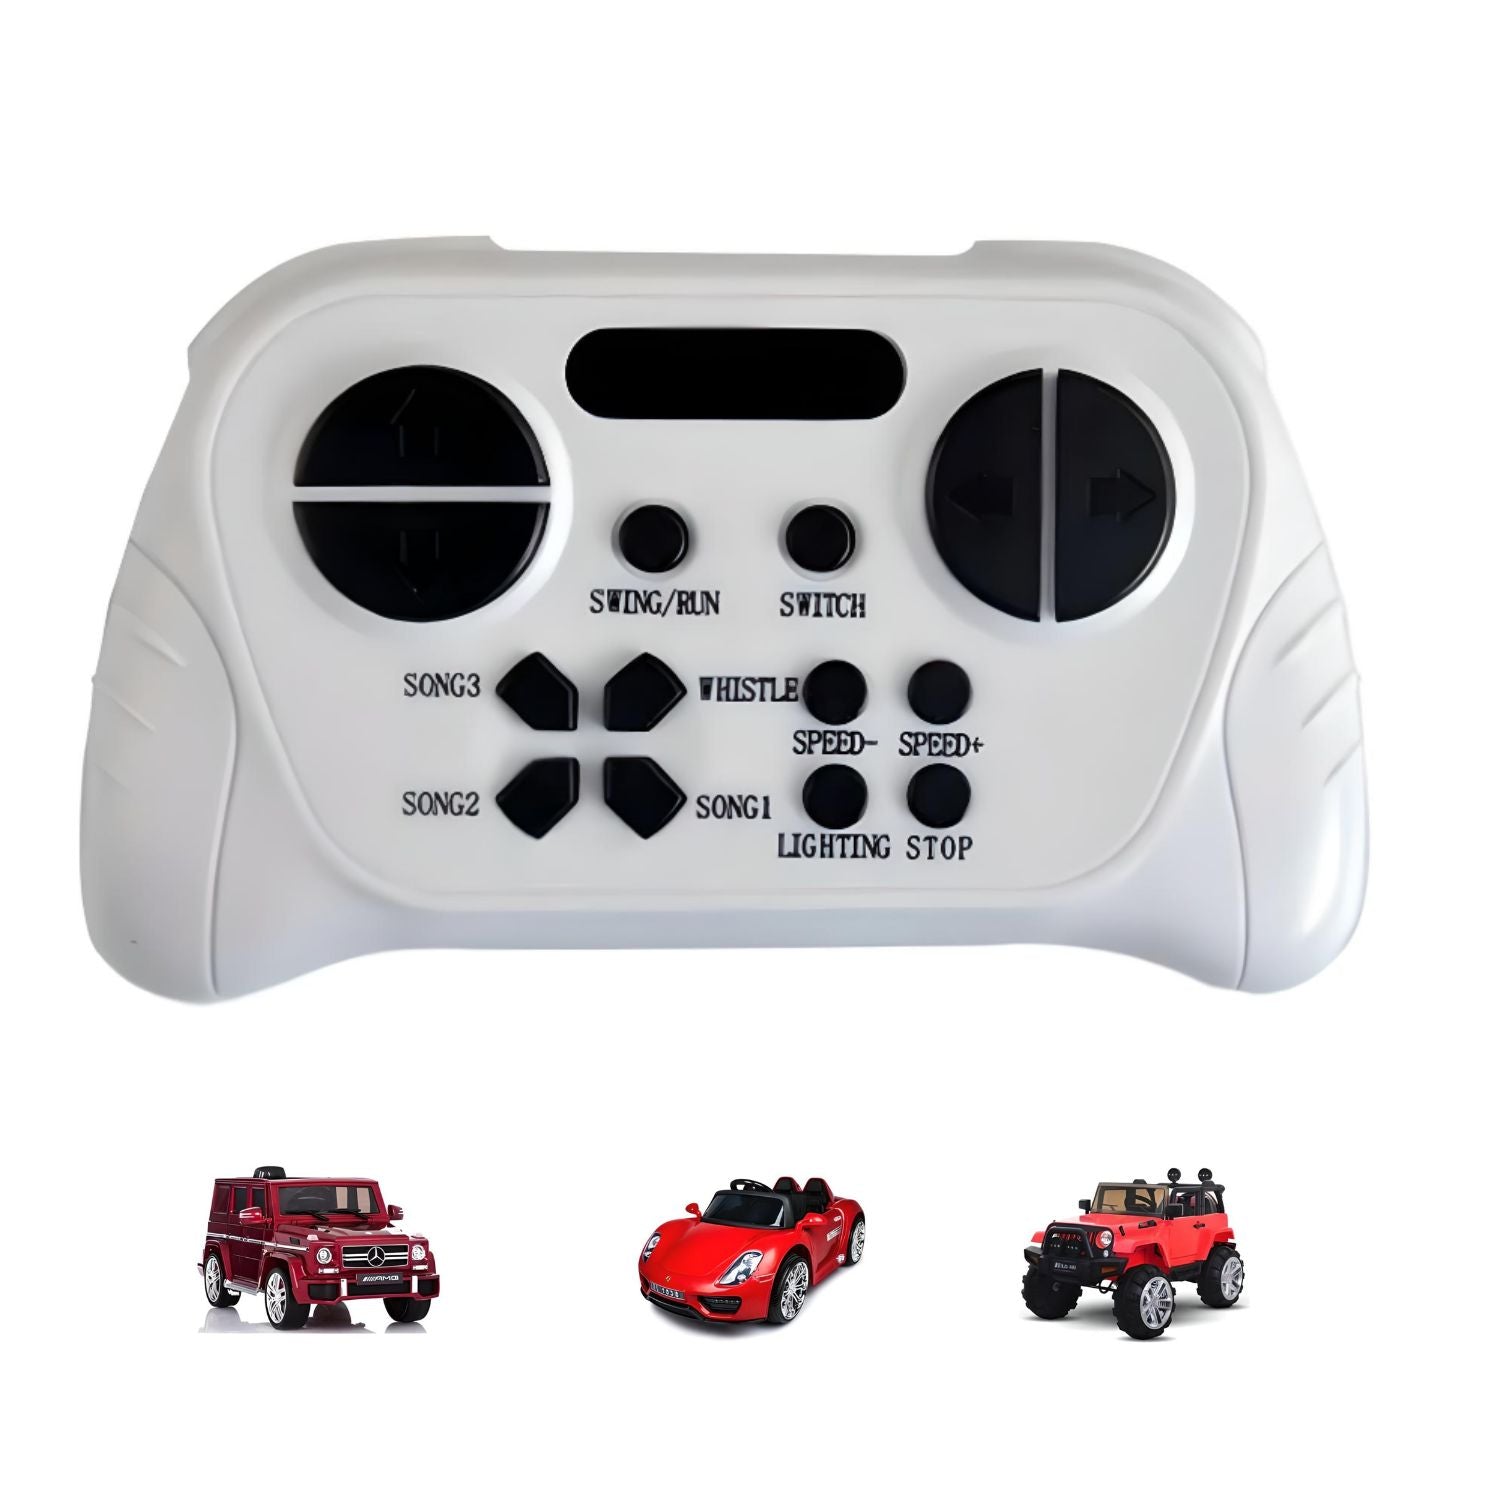 MM TOYS HH 621Y Multi-Function Remote Control for Kids Electric Car Compatible With HH621K-2 and HH611K-2 Motor Controllers (Not Included) - White